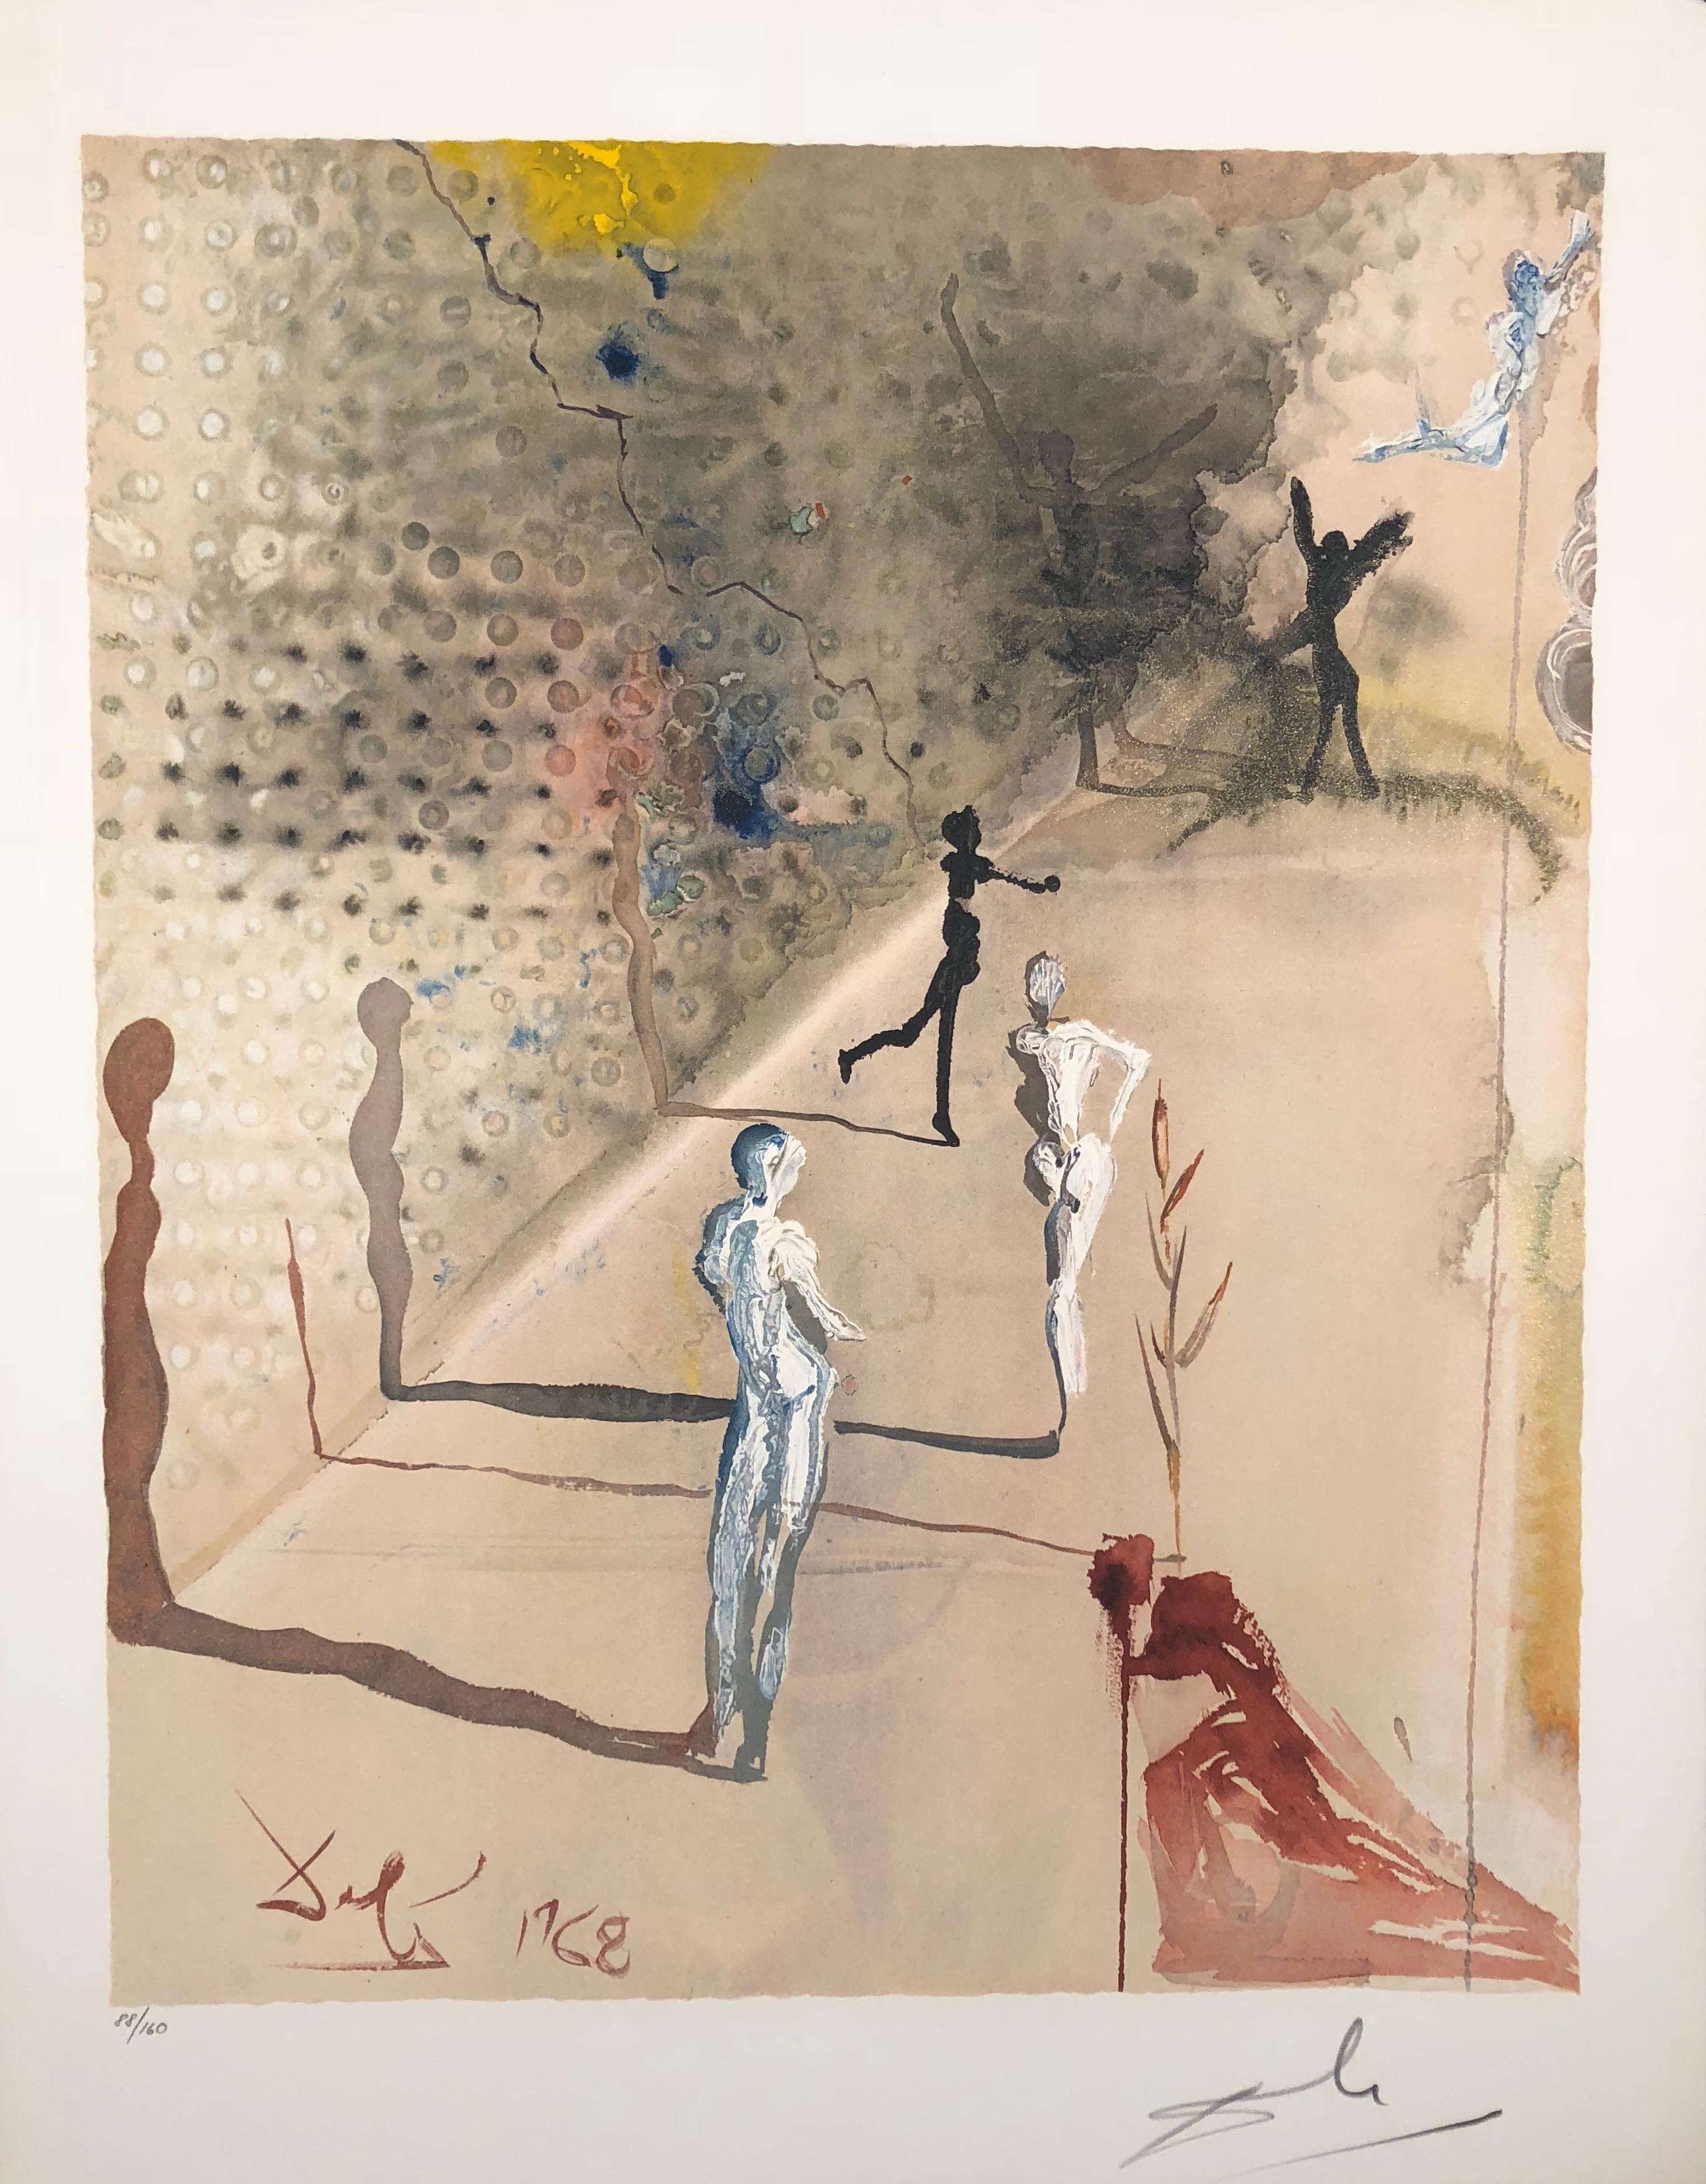 Salvador Dalí Abstract Print – All's Well that Ends Well from the Marquis de Sade